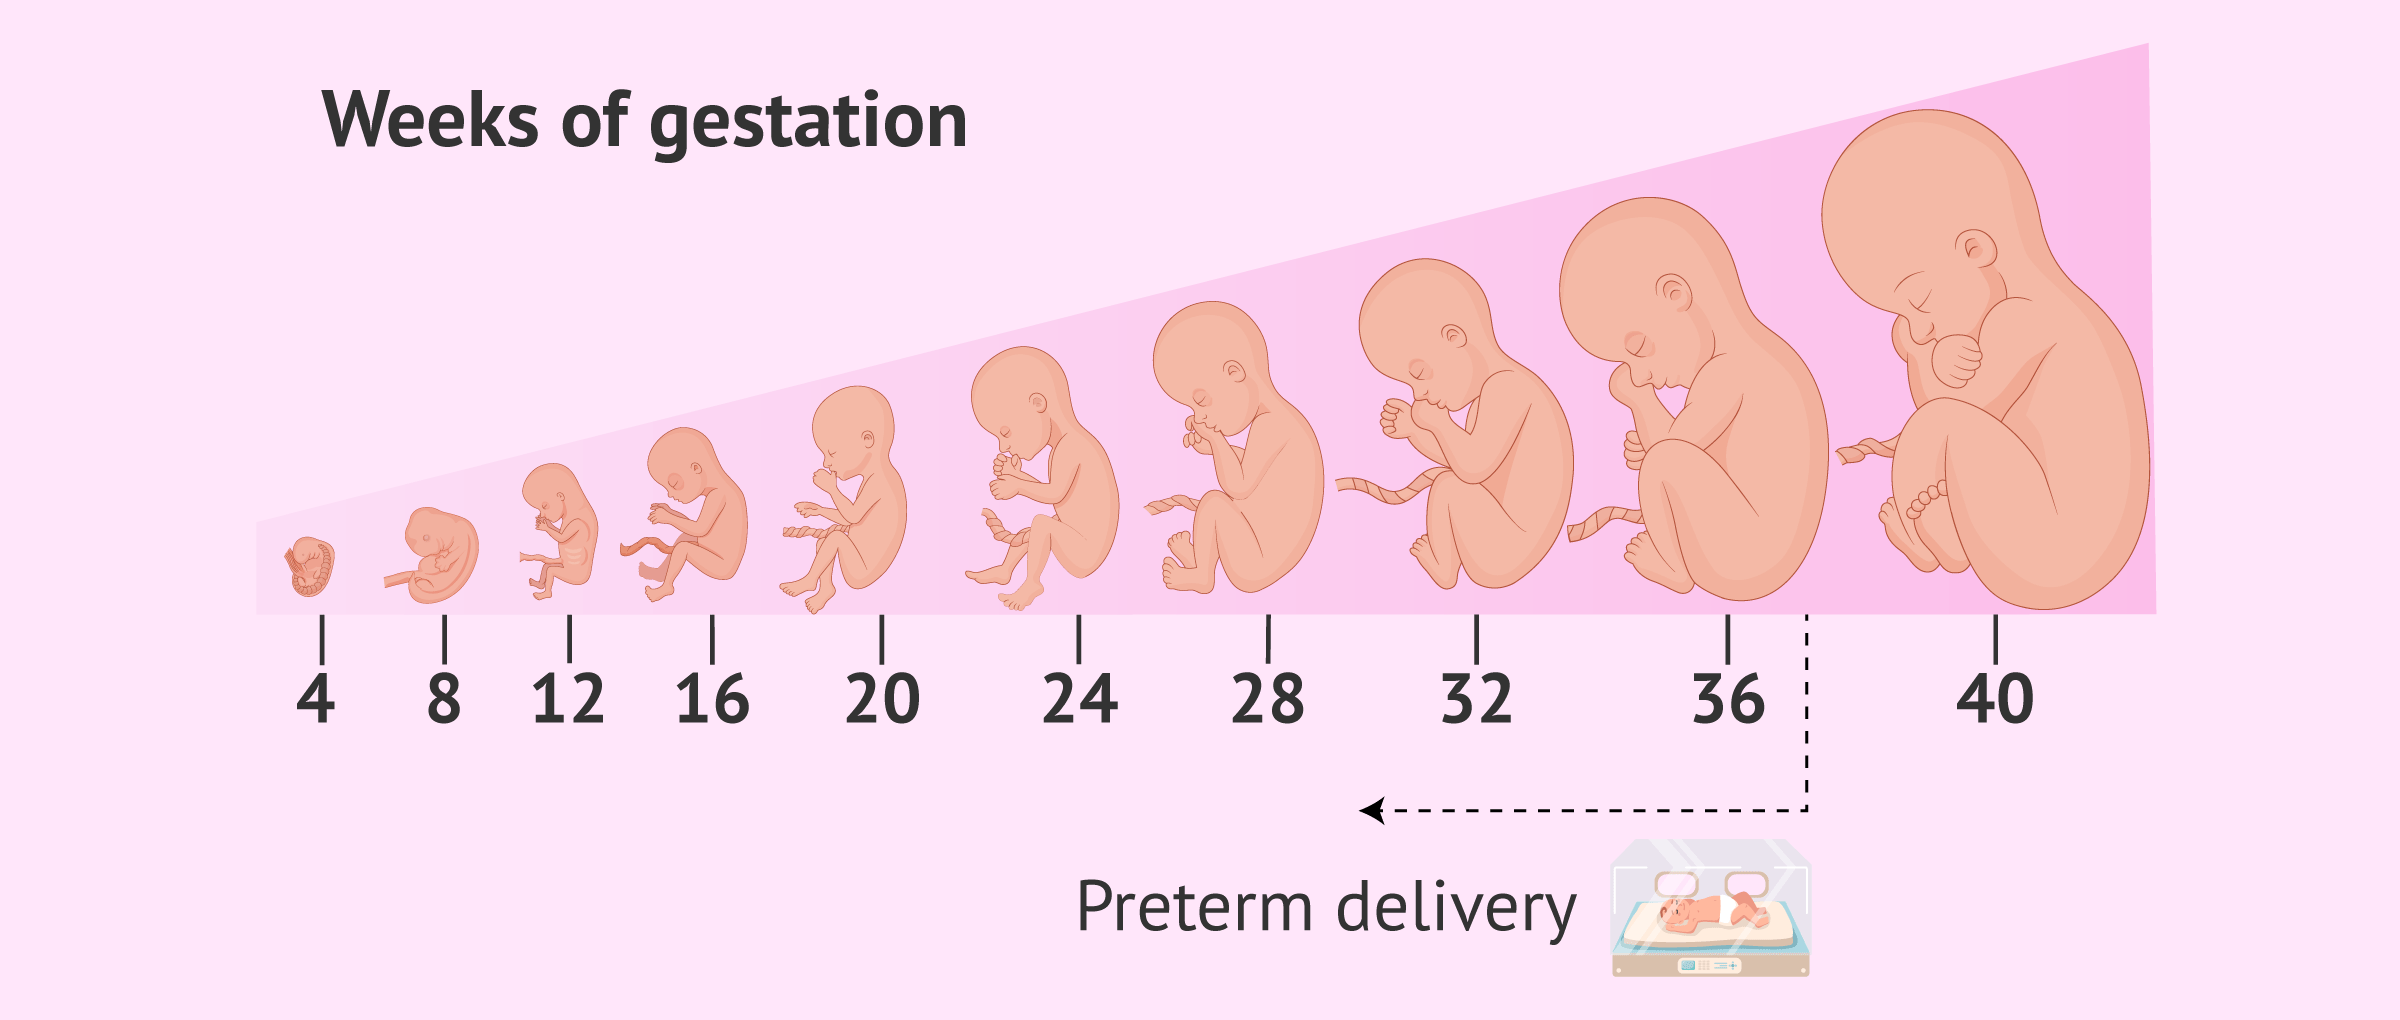 Preterm delivery as a possible complication of pregnancy